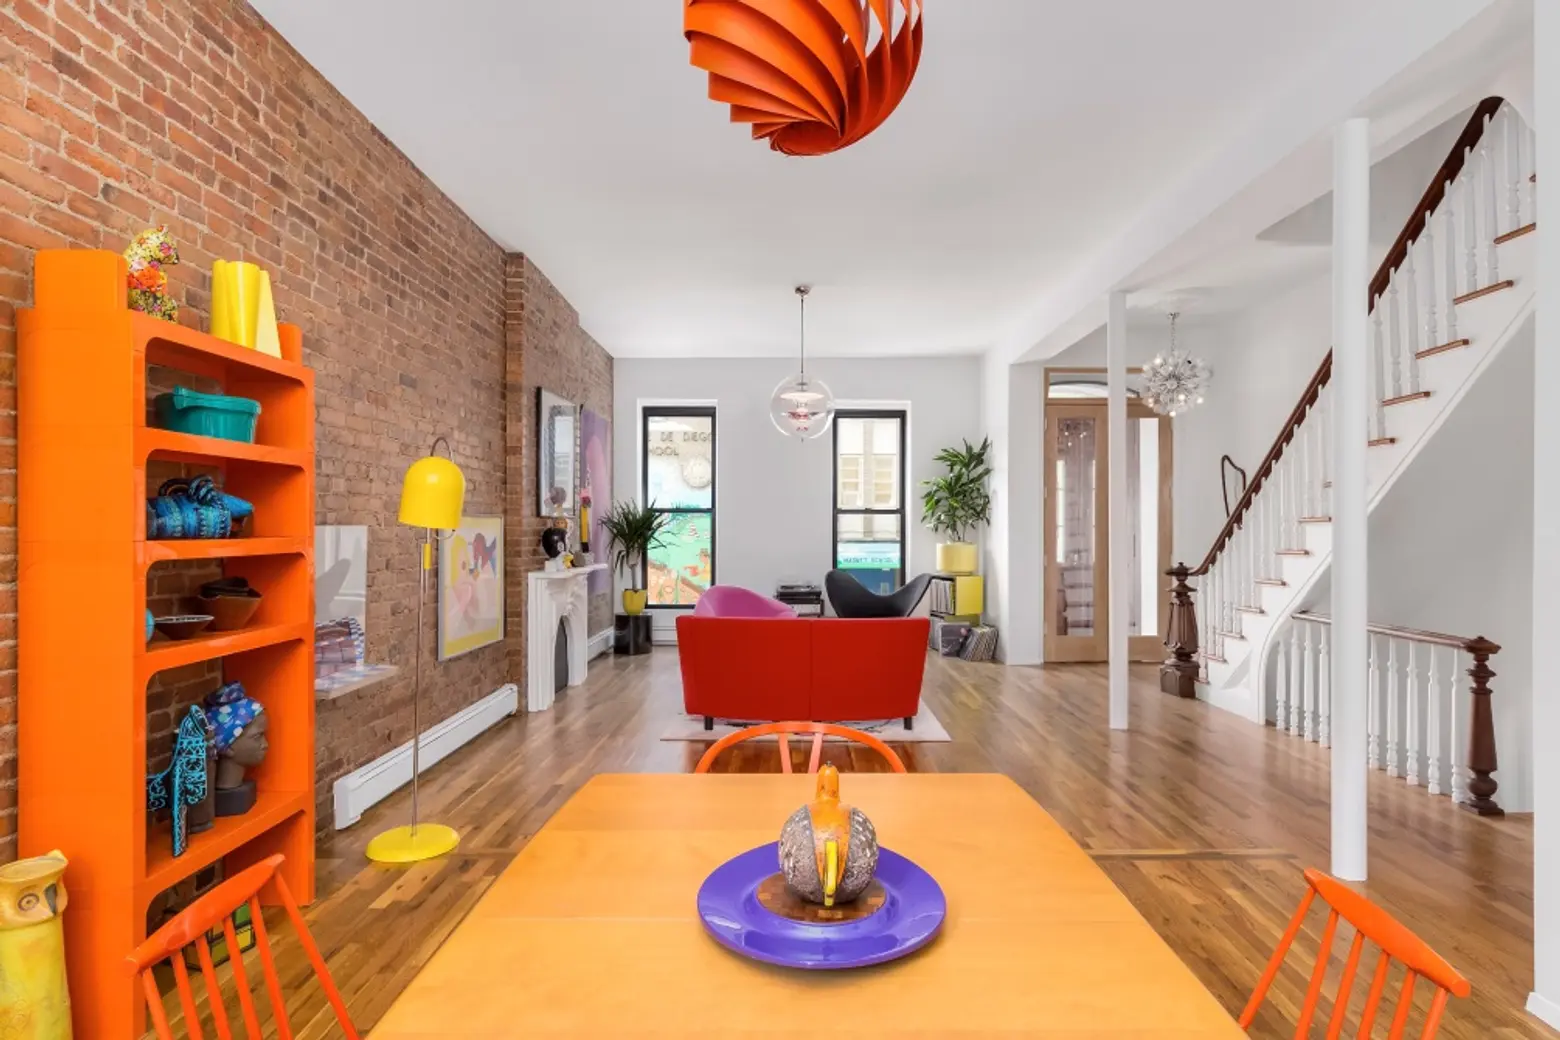 267 Berry Street, Cool listings, Williamsburg, townhouse, interiors